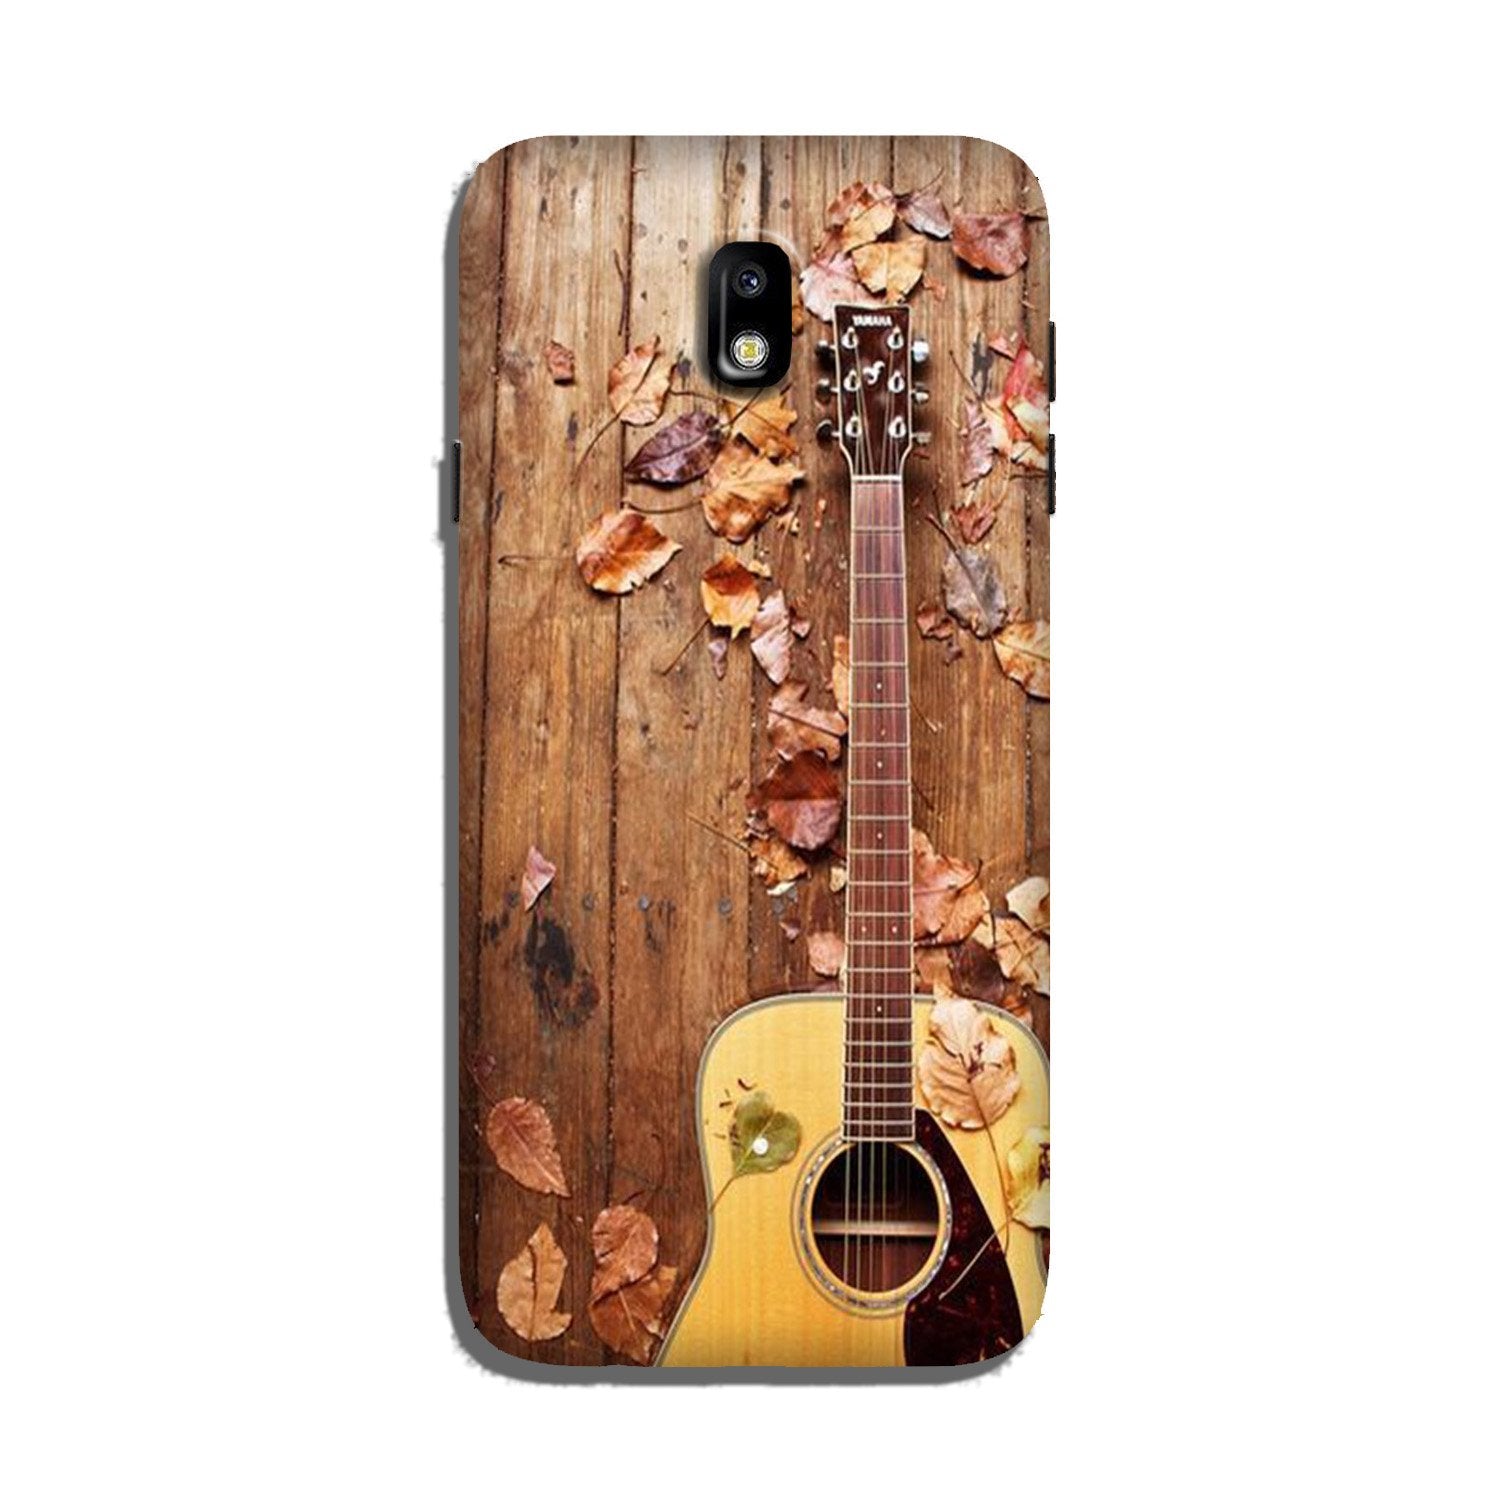 Guitar Case for Galaxy J7 Pro